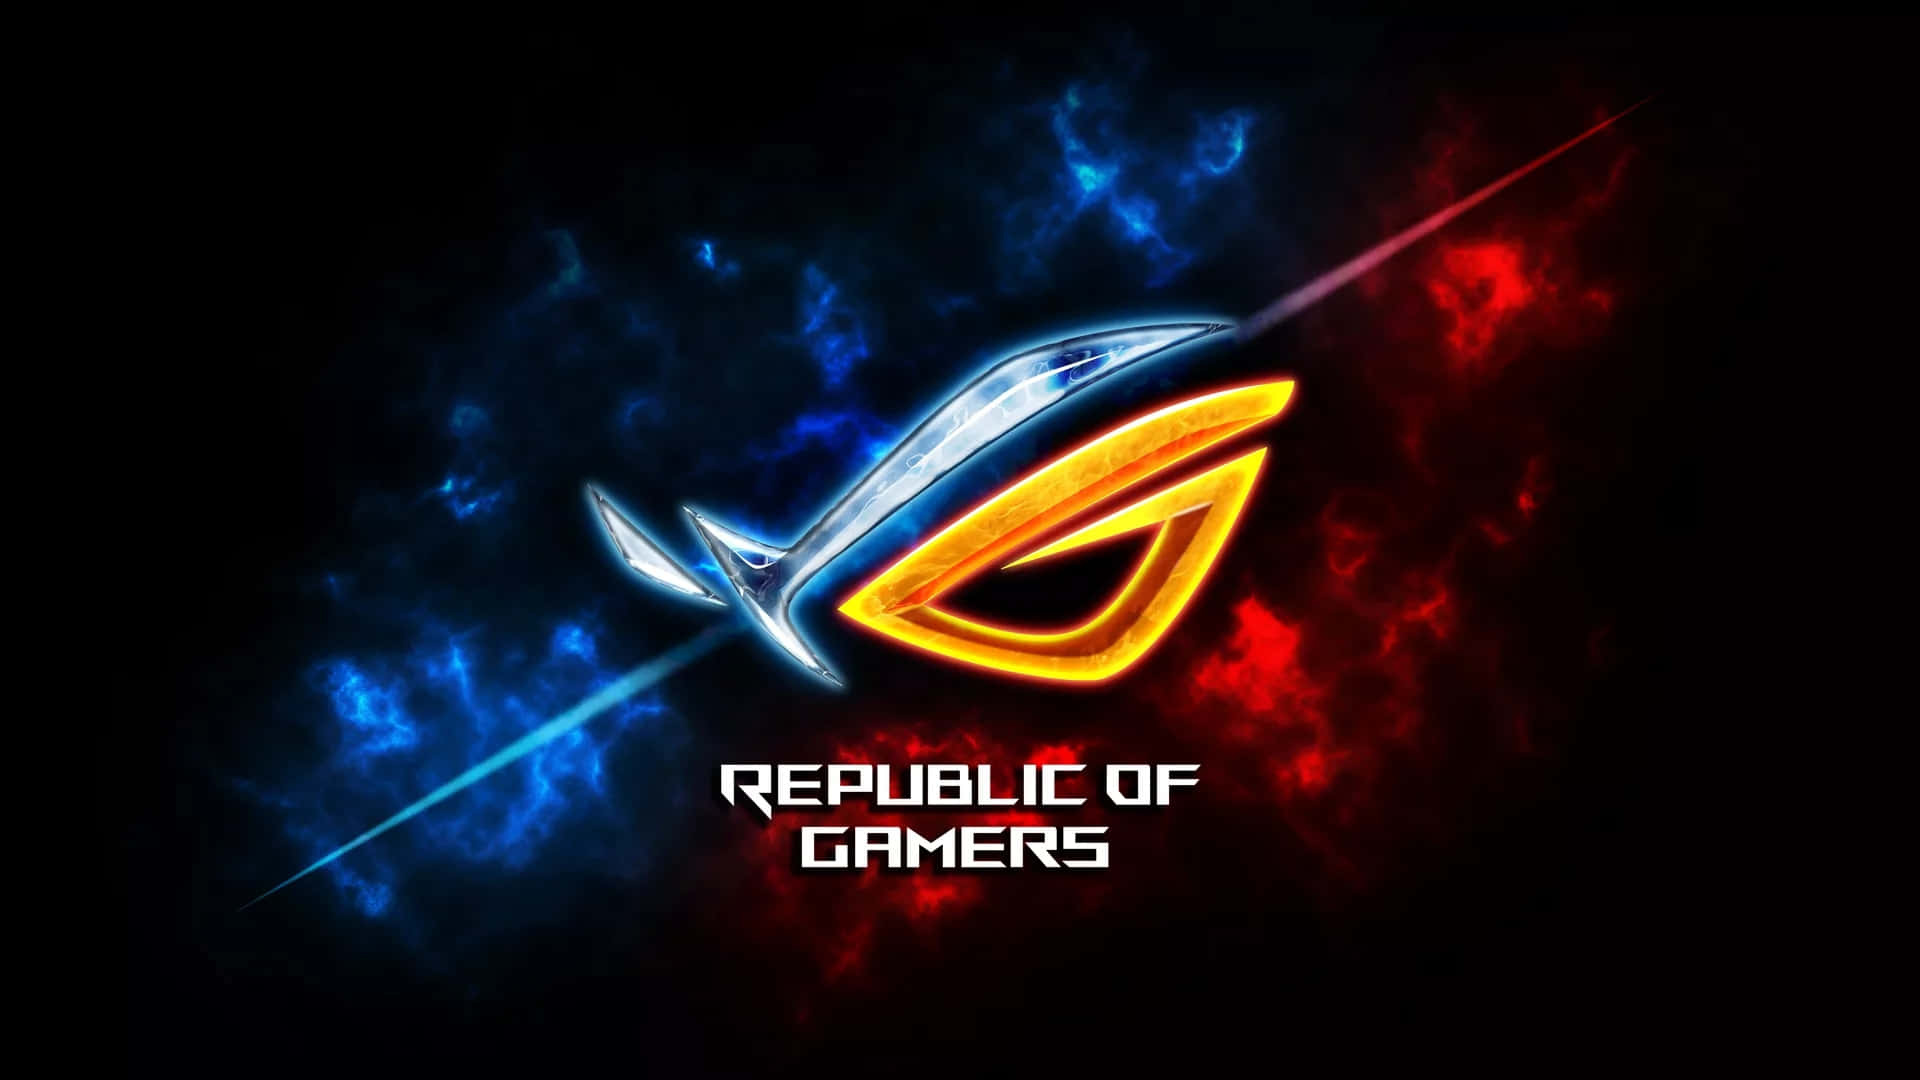 Asus R O G Logowith Red Blue Effects Background